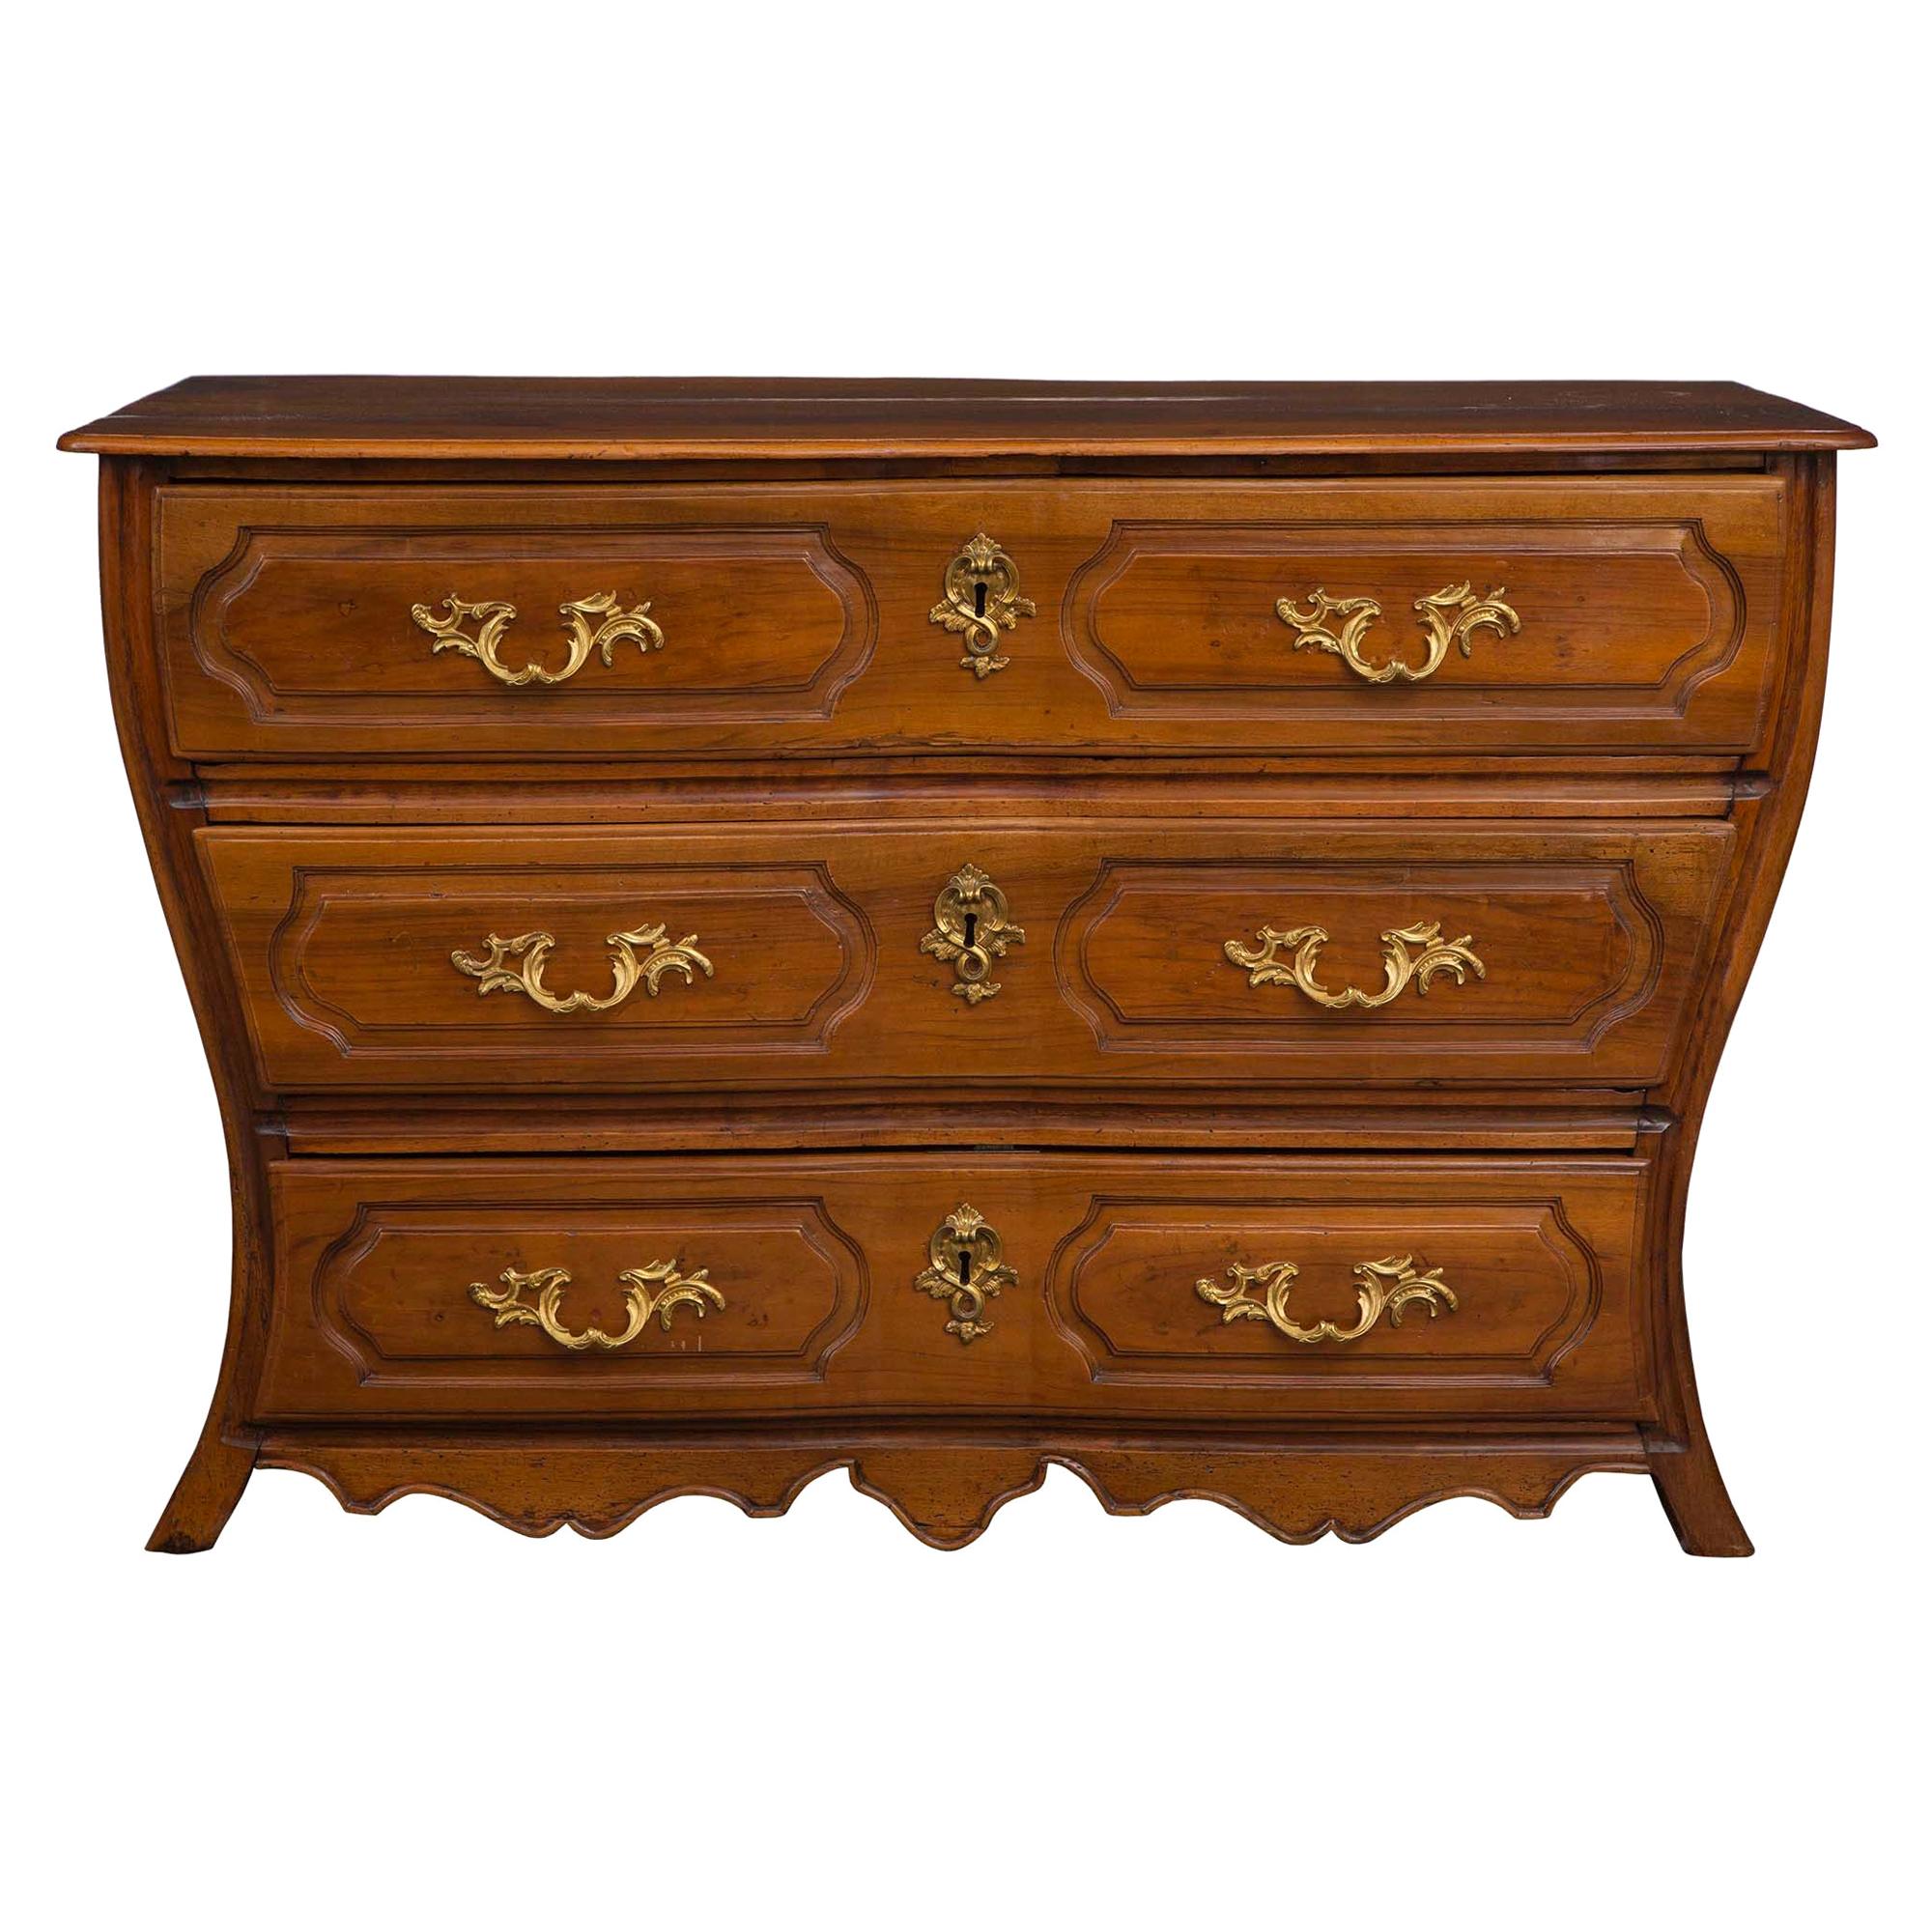 French 18th Century Louis XV Period Walnut and Ormolu Three-Drawer Commode For Sale